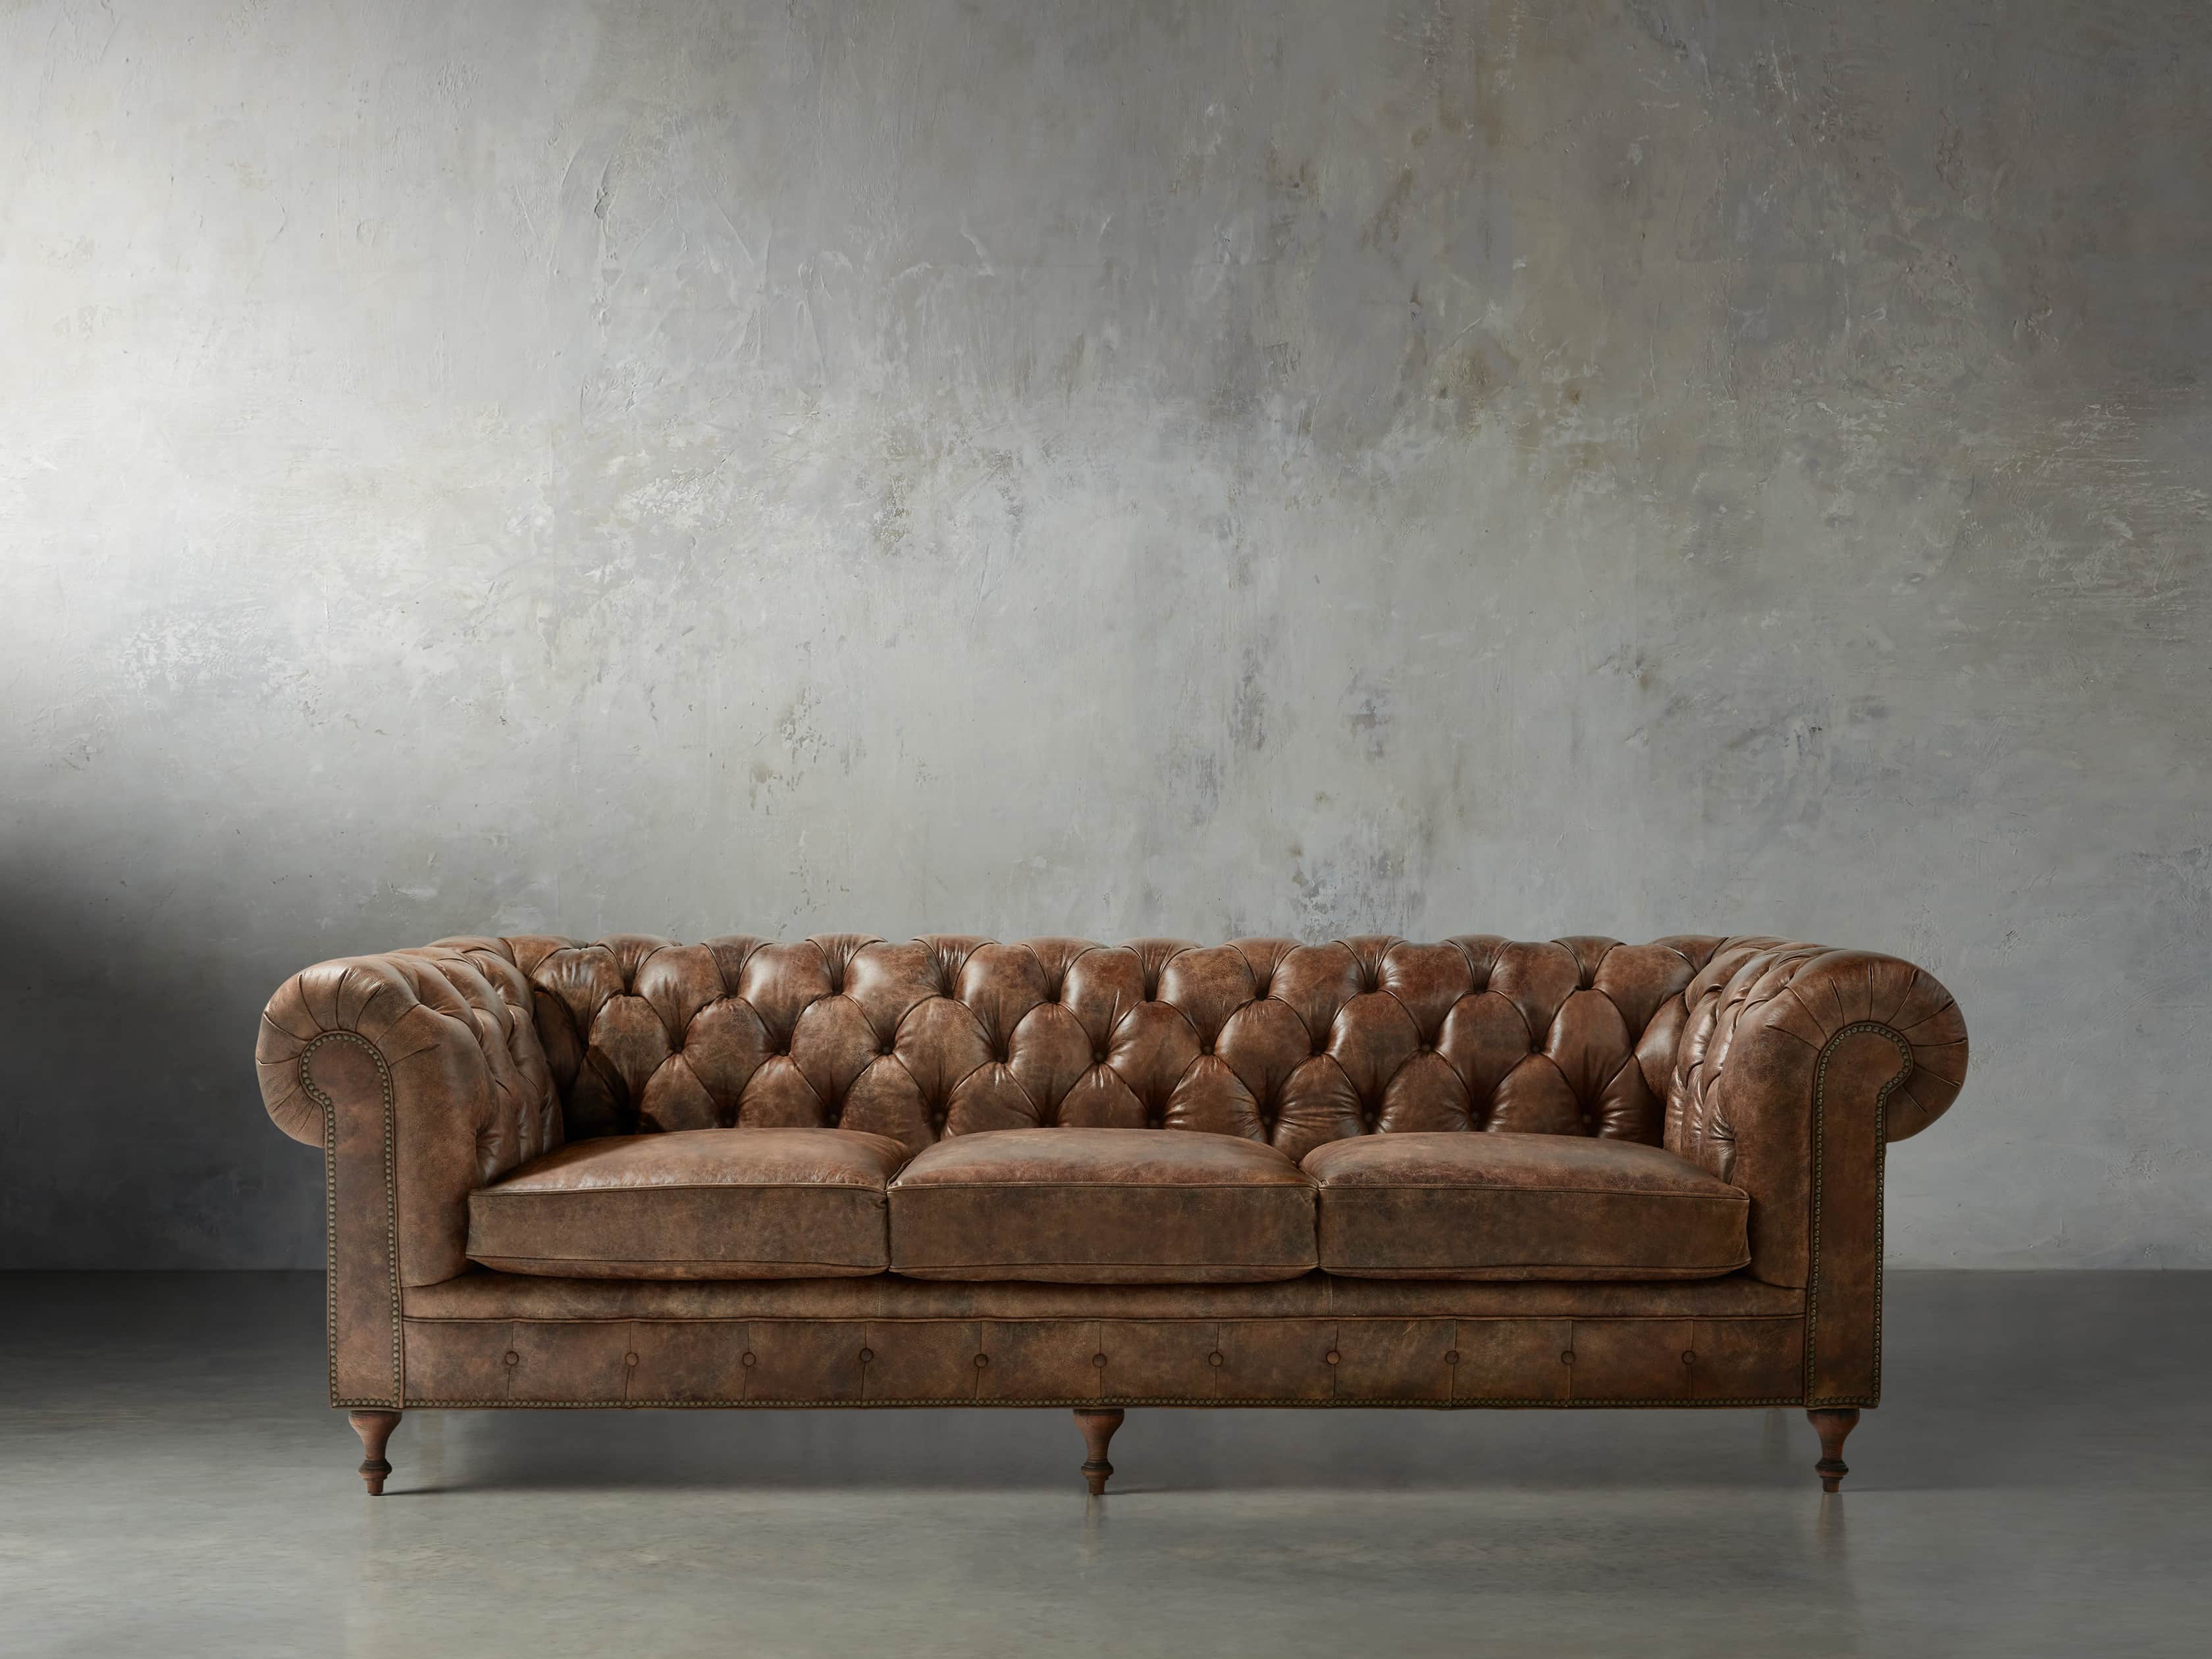 Wes Leather Sofa Arhaus, How To Make Tufted Leather Sofa